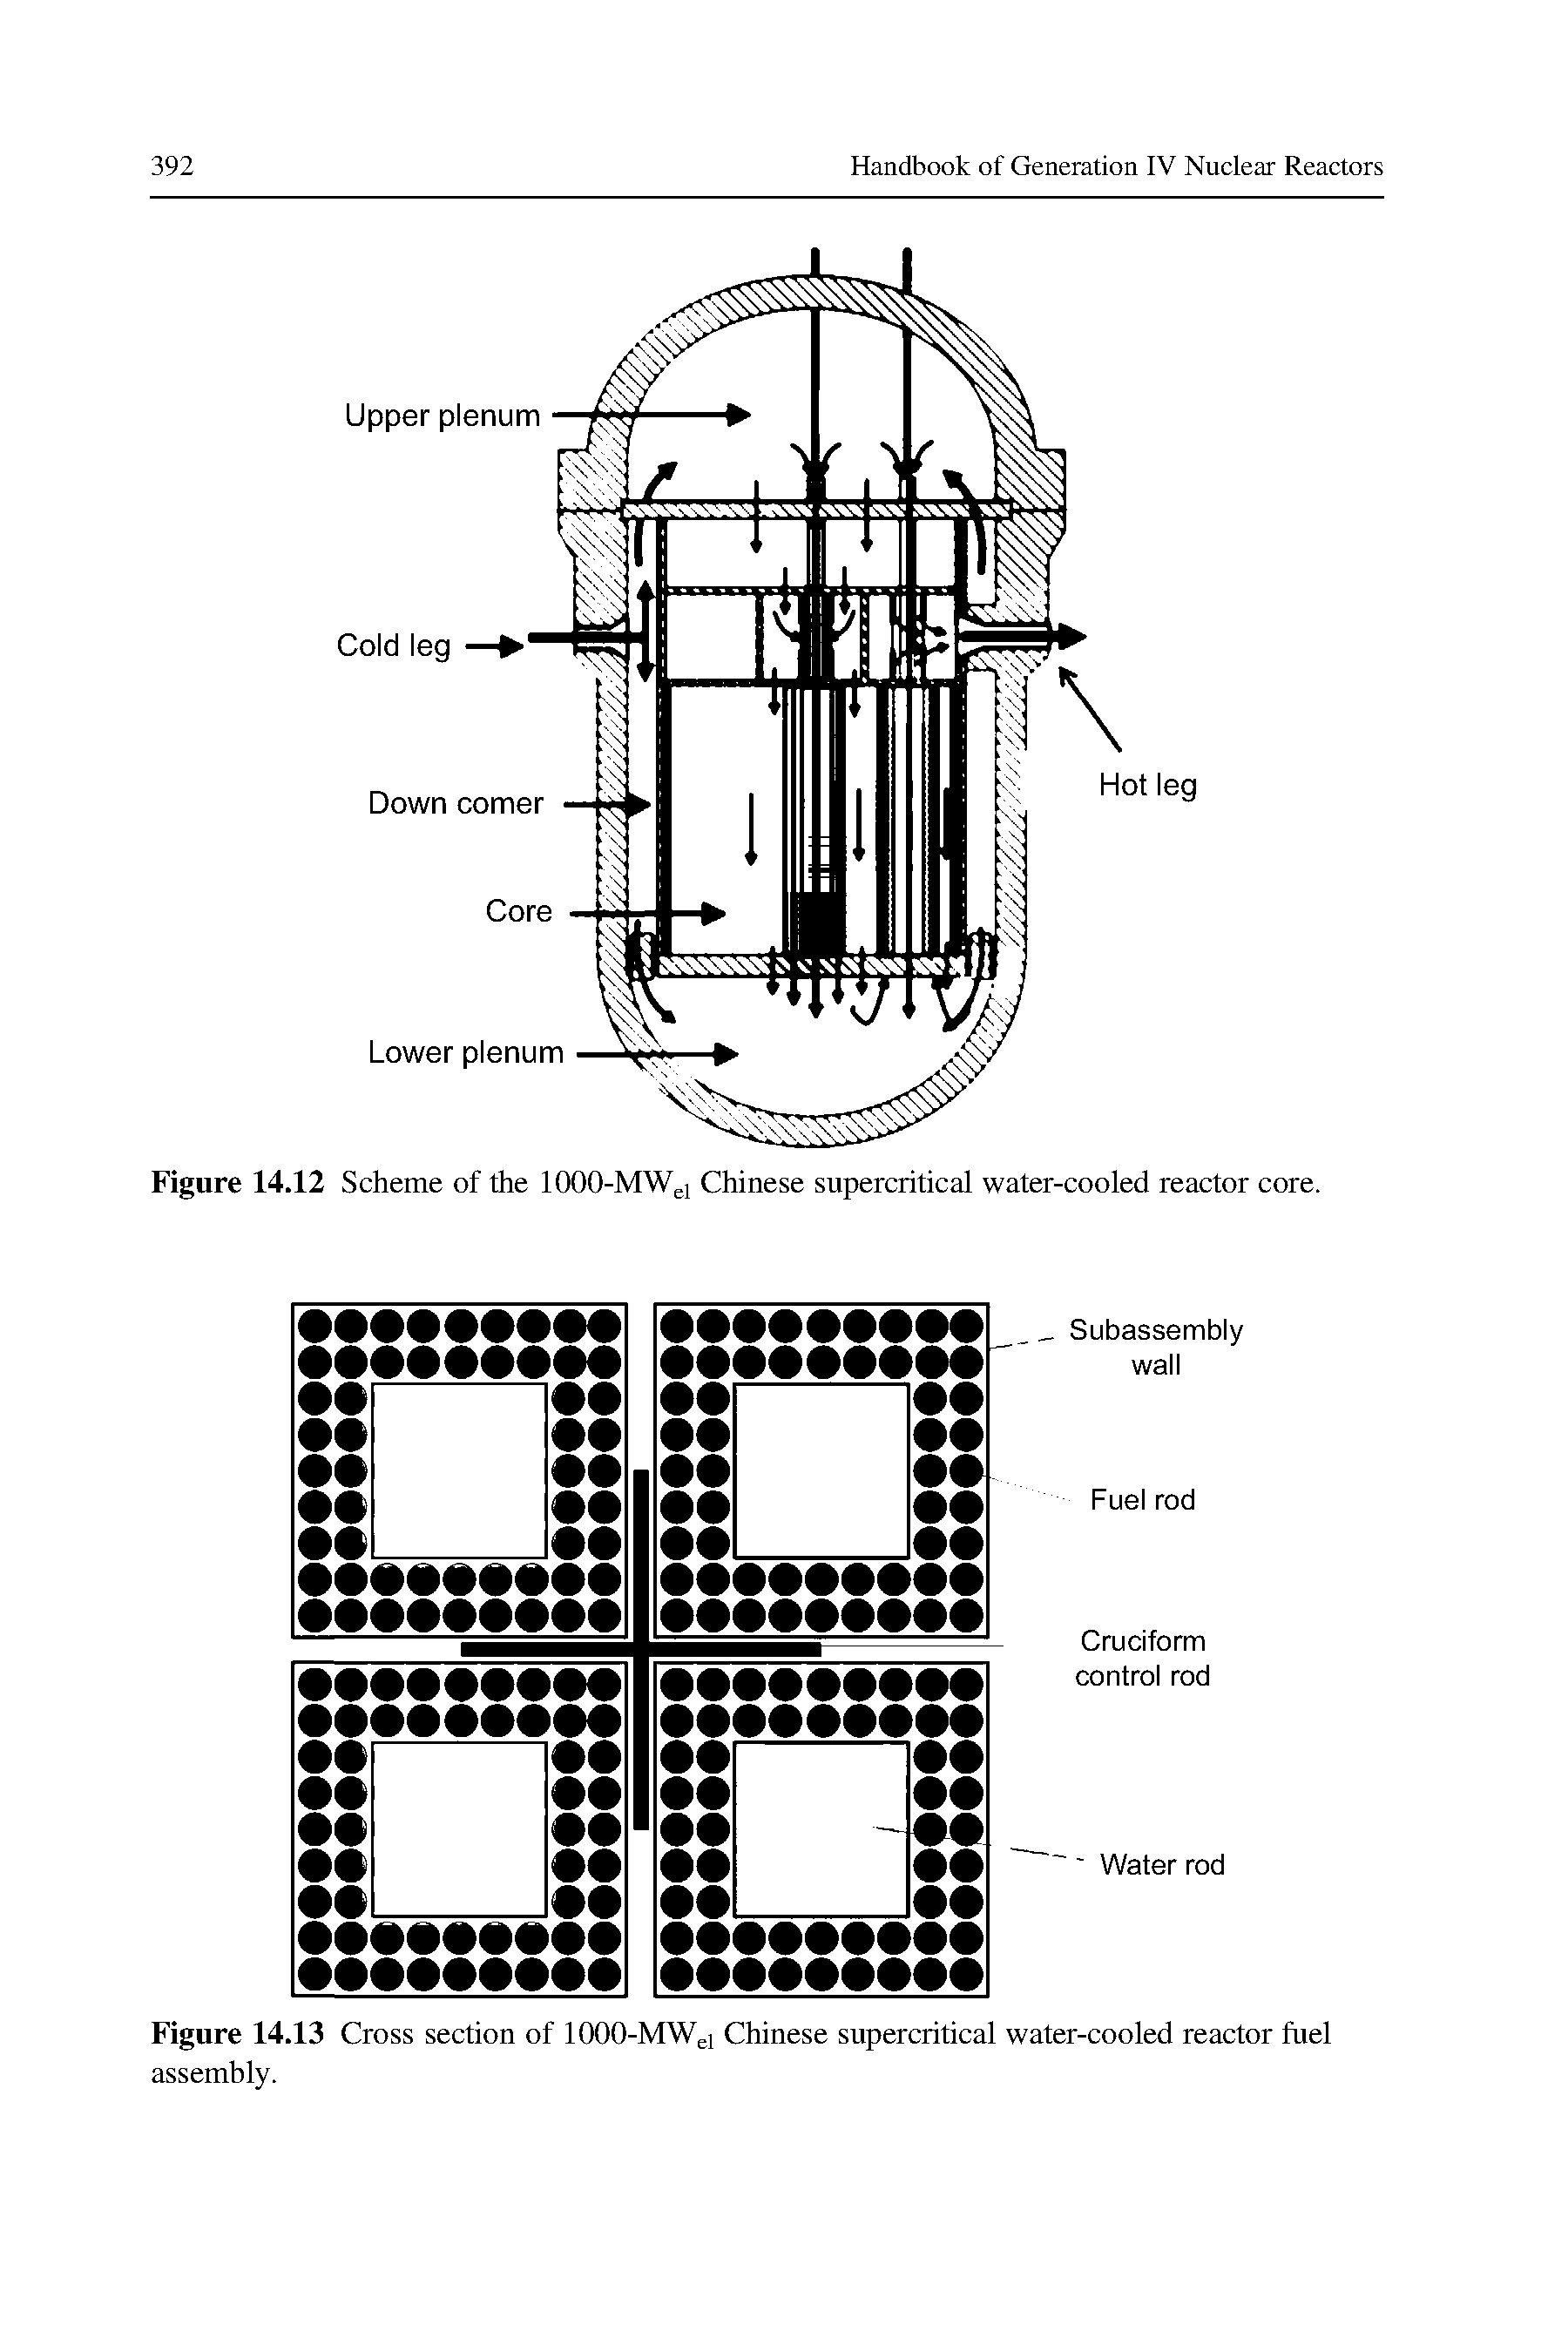 Figure 14.13 Cross section of 1000-MWj.i Chinese supercritical water-cooled reactor fuel assembly.